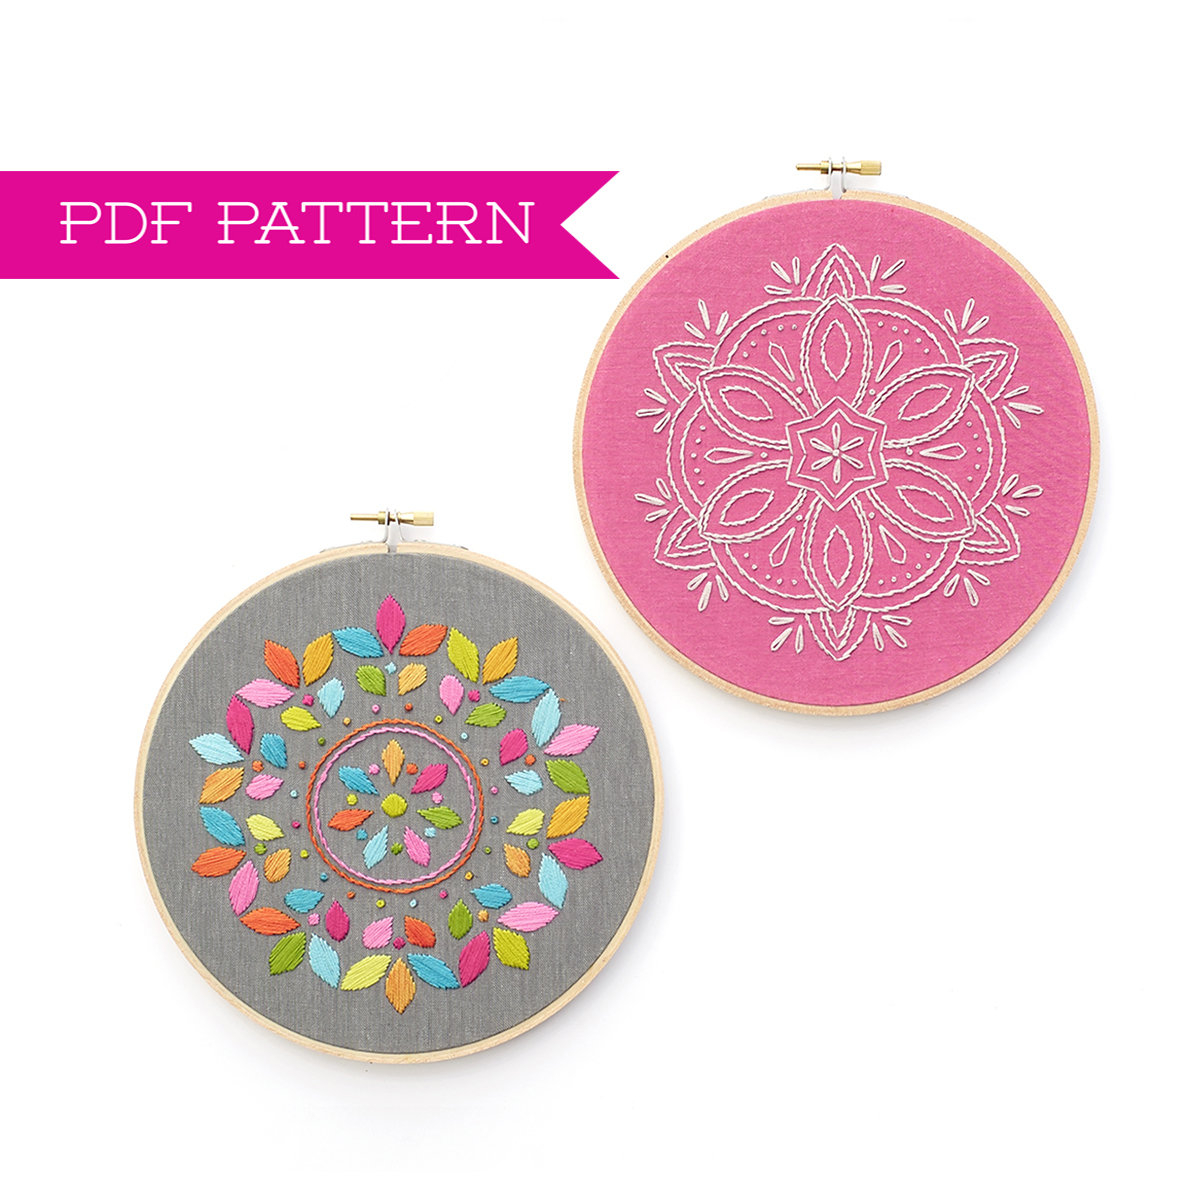 Mandala Embroidery Patterns Embroidery Pattern Pdf Pattern Mandala Design Mandala Embroidery Floral Embroidery Diy Hoop Art Embroidery Tutorial Boho Decor